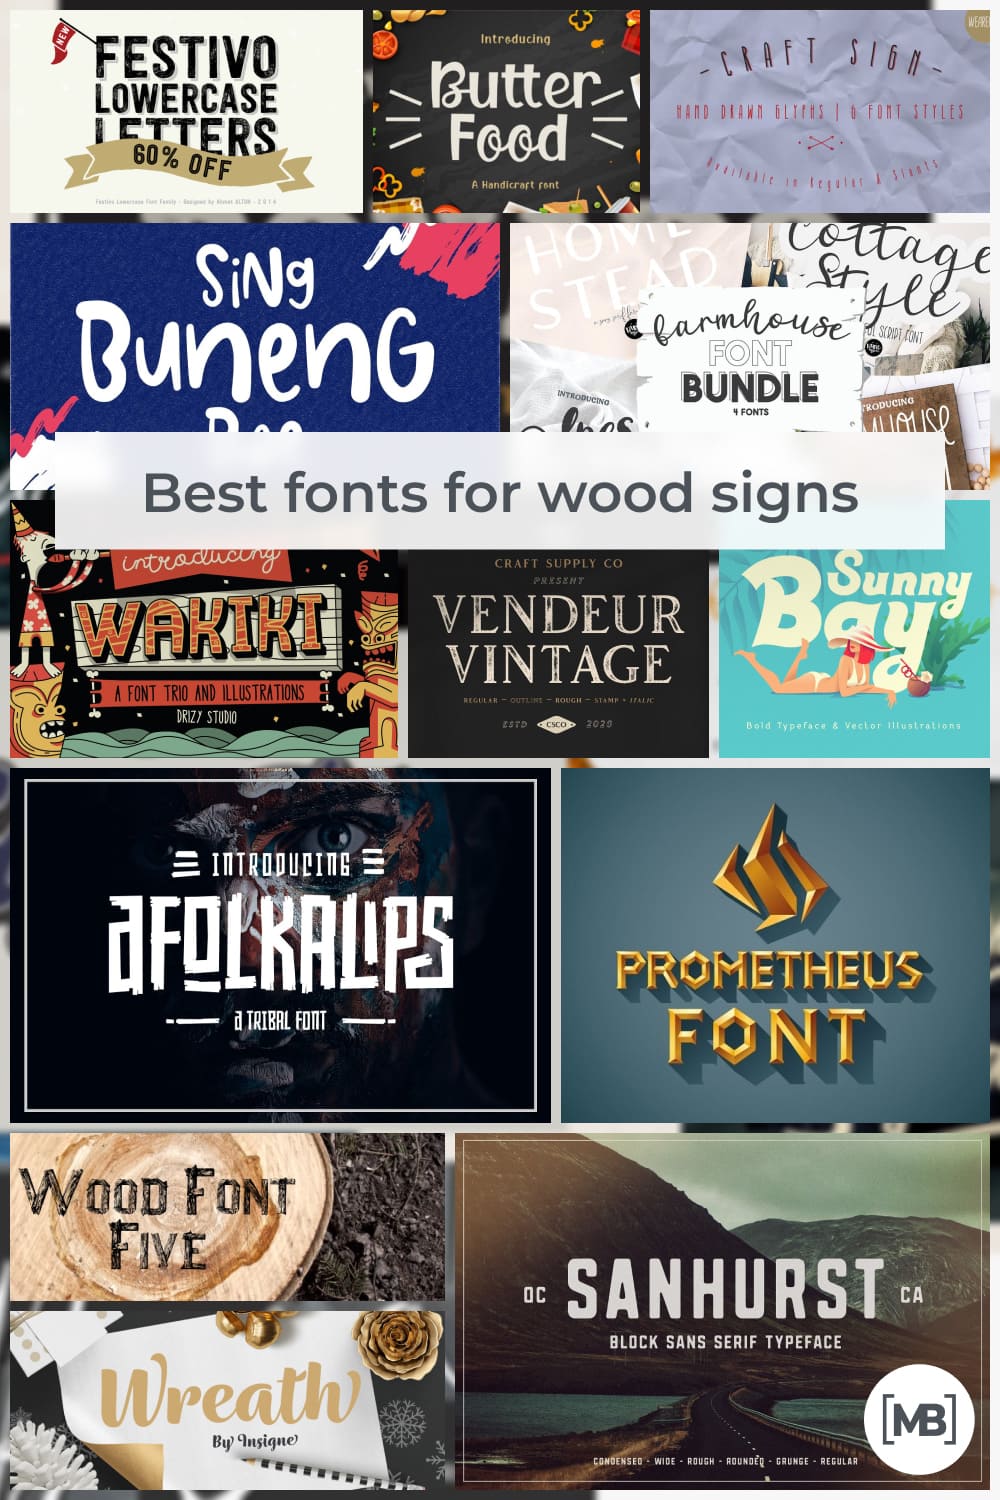 Fonts for Wood Signs Pinterest.